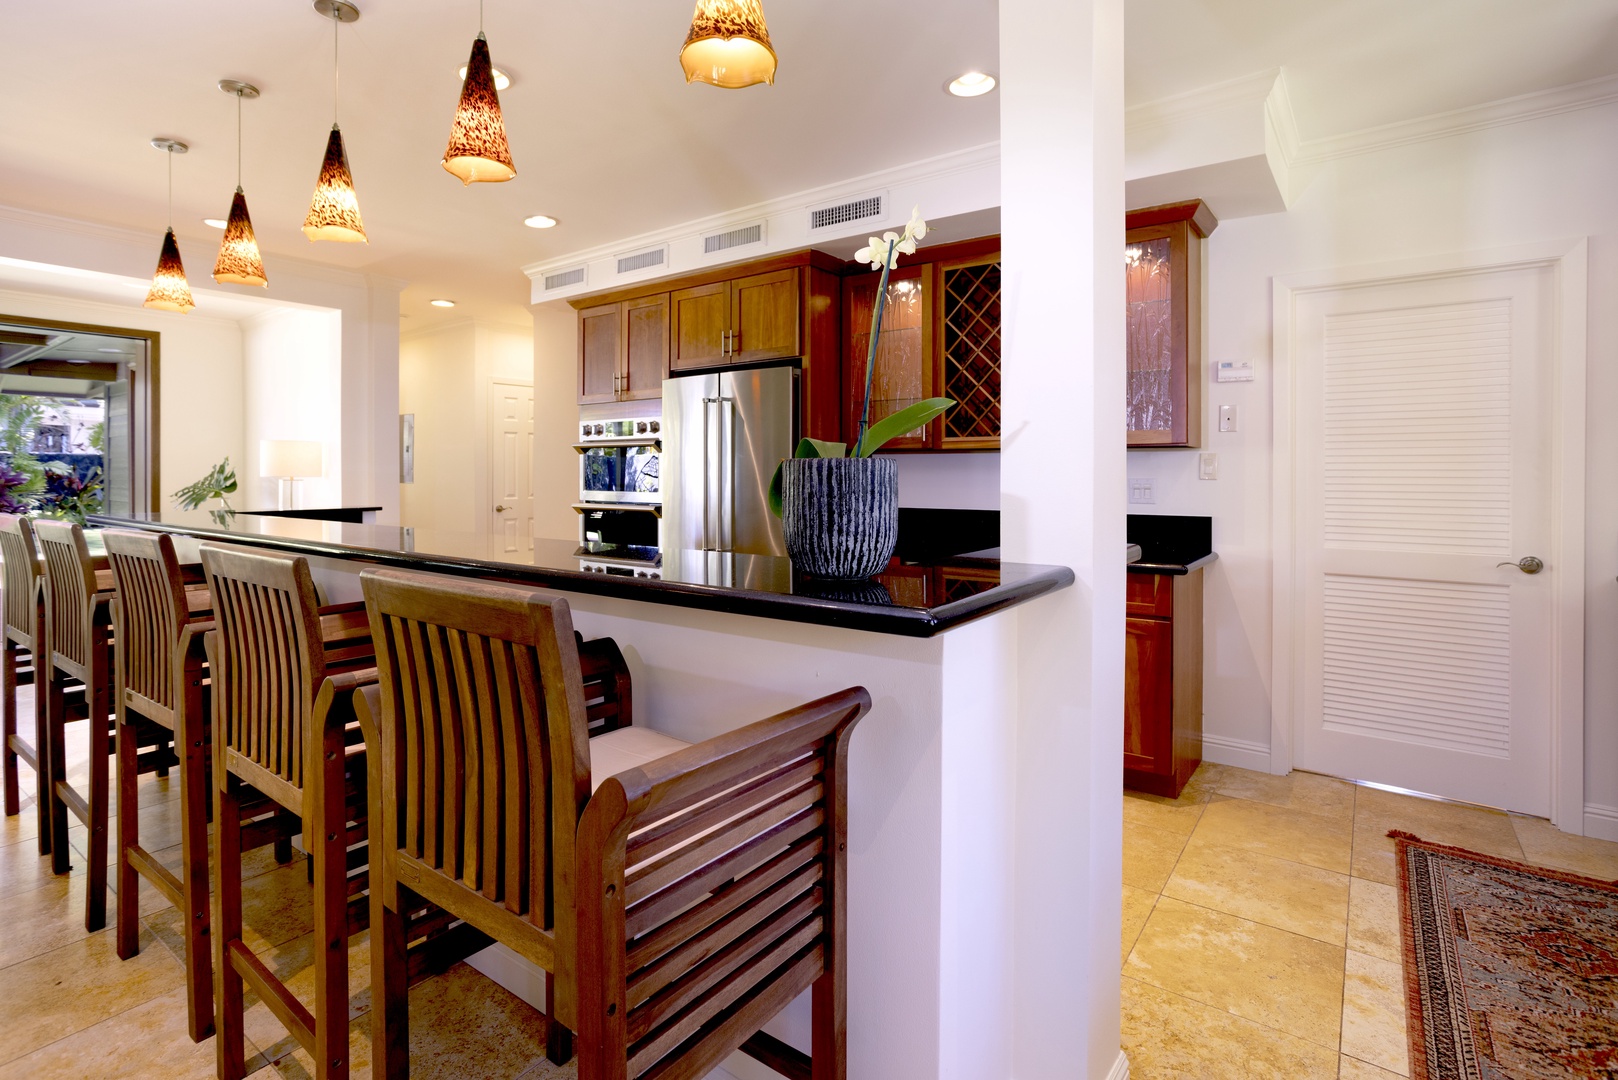 Kailua Vacation Rentals, Mokulua Seaside - Breakfast bar with seating for five connects the living and kitchen space